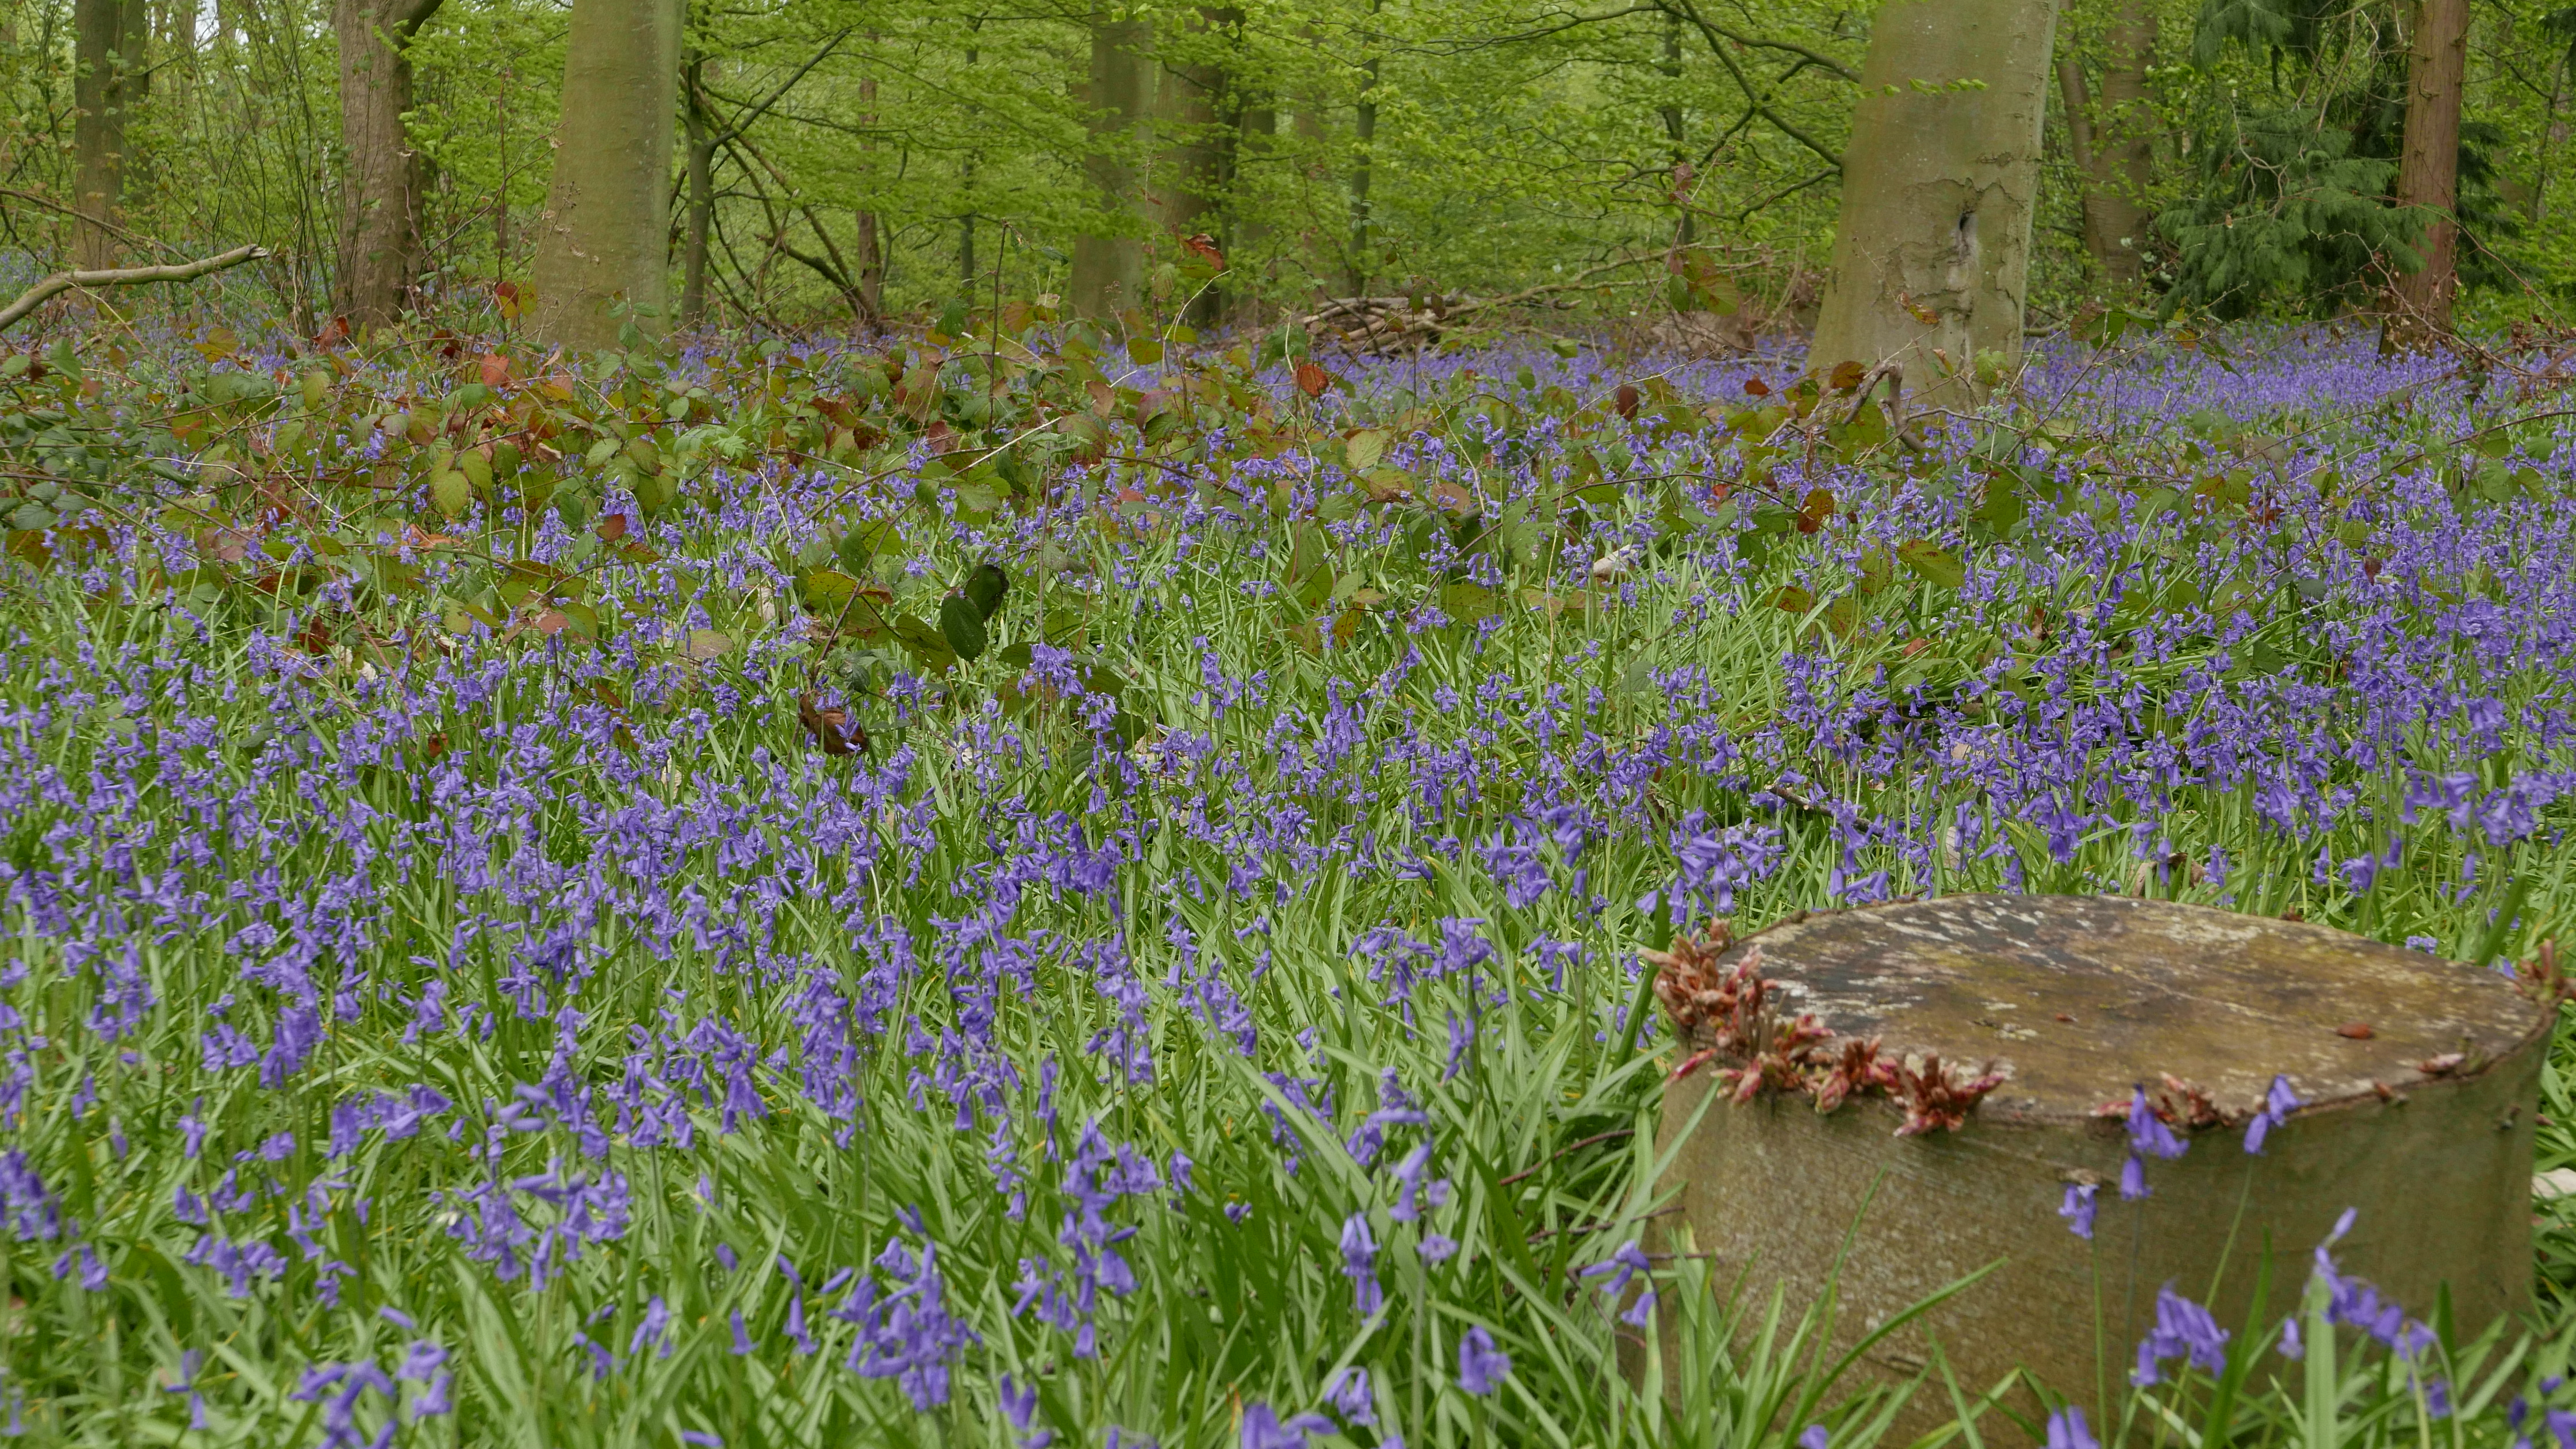 Bluebells in Clumber Park, a National Trust property in north Nottinghamshire.